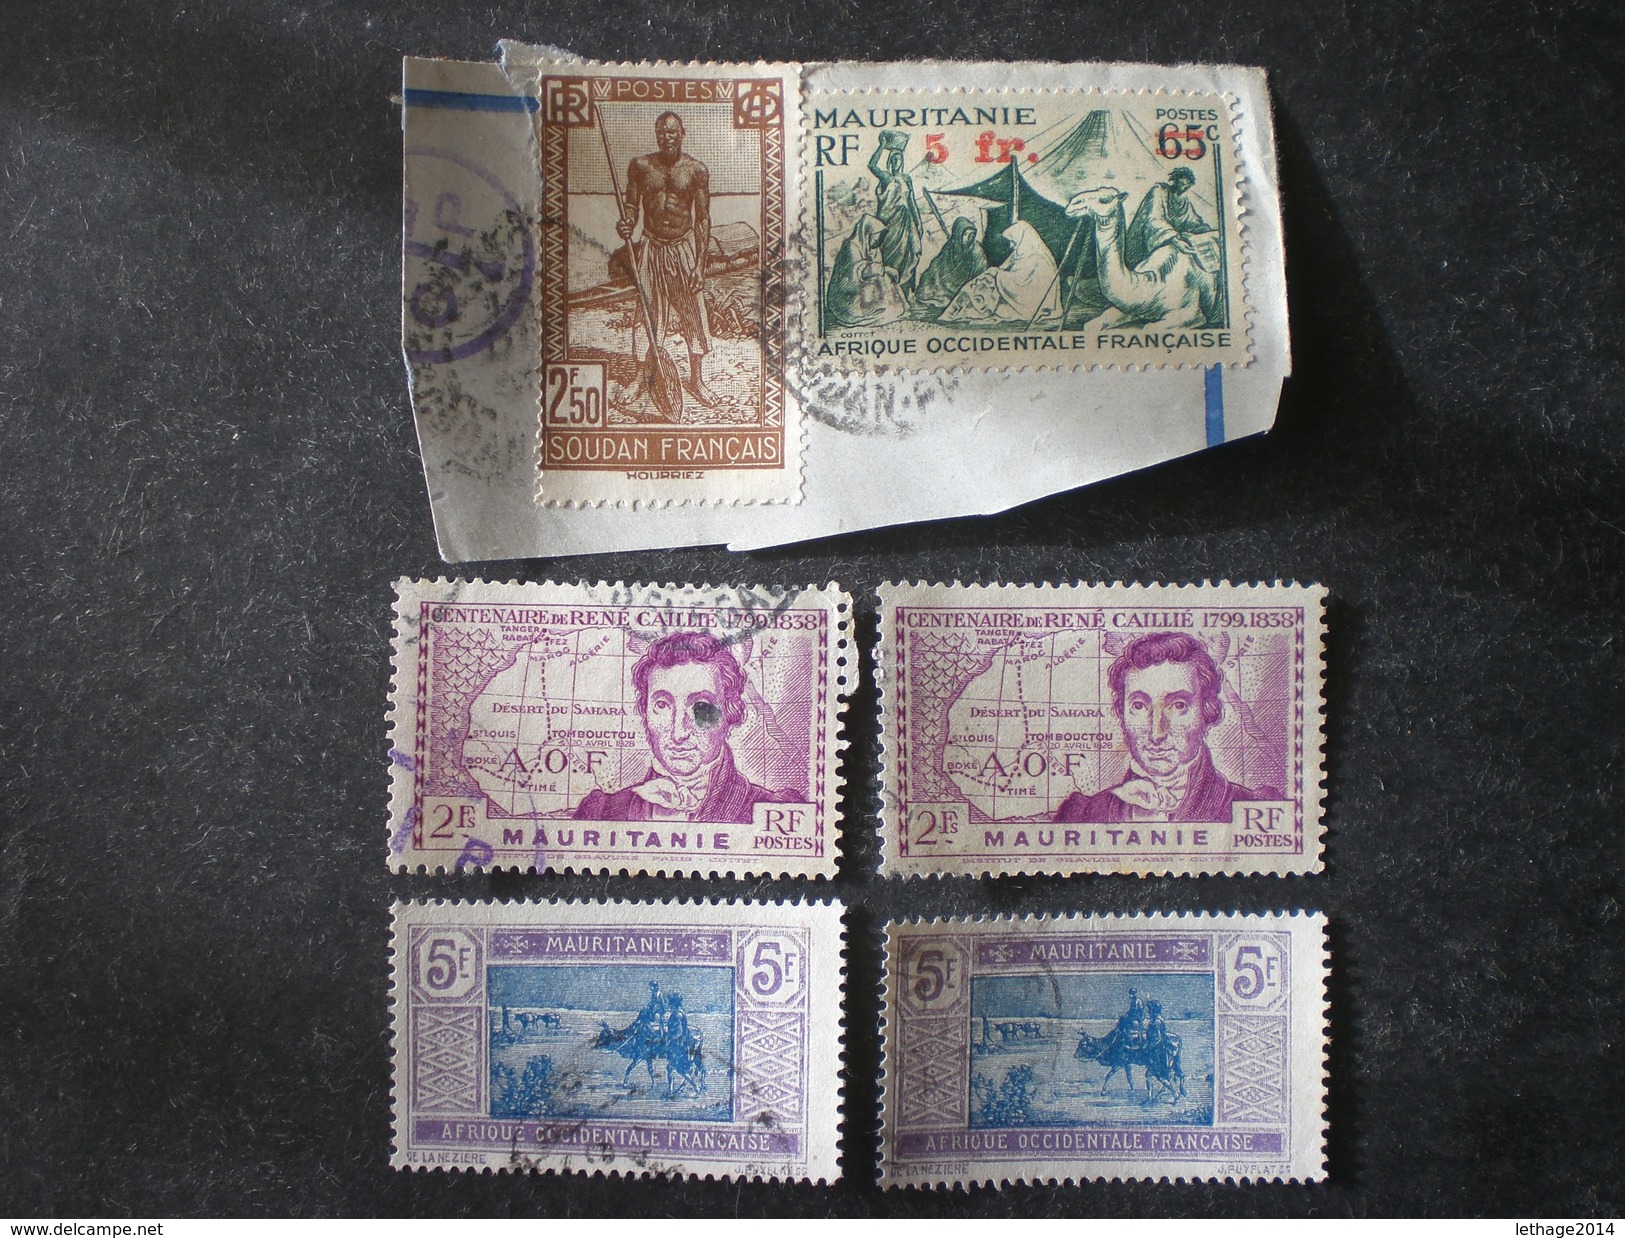 AOF MAURITANIA MAURITANIE موريتانيا Mauritanië 1944 Issues Of 1938 And 1939 Surcharged  + 1906 CAMEL - Used Stamps